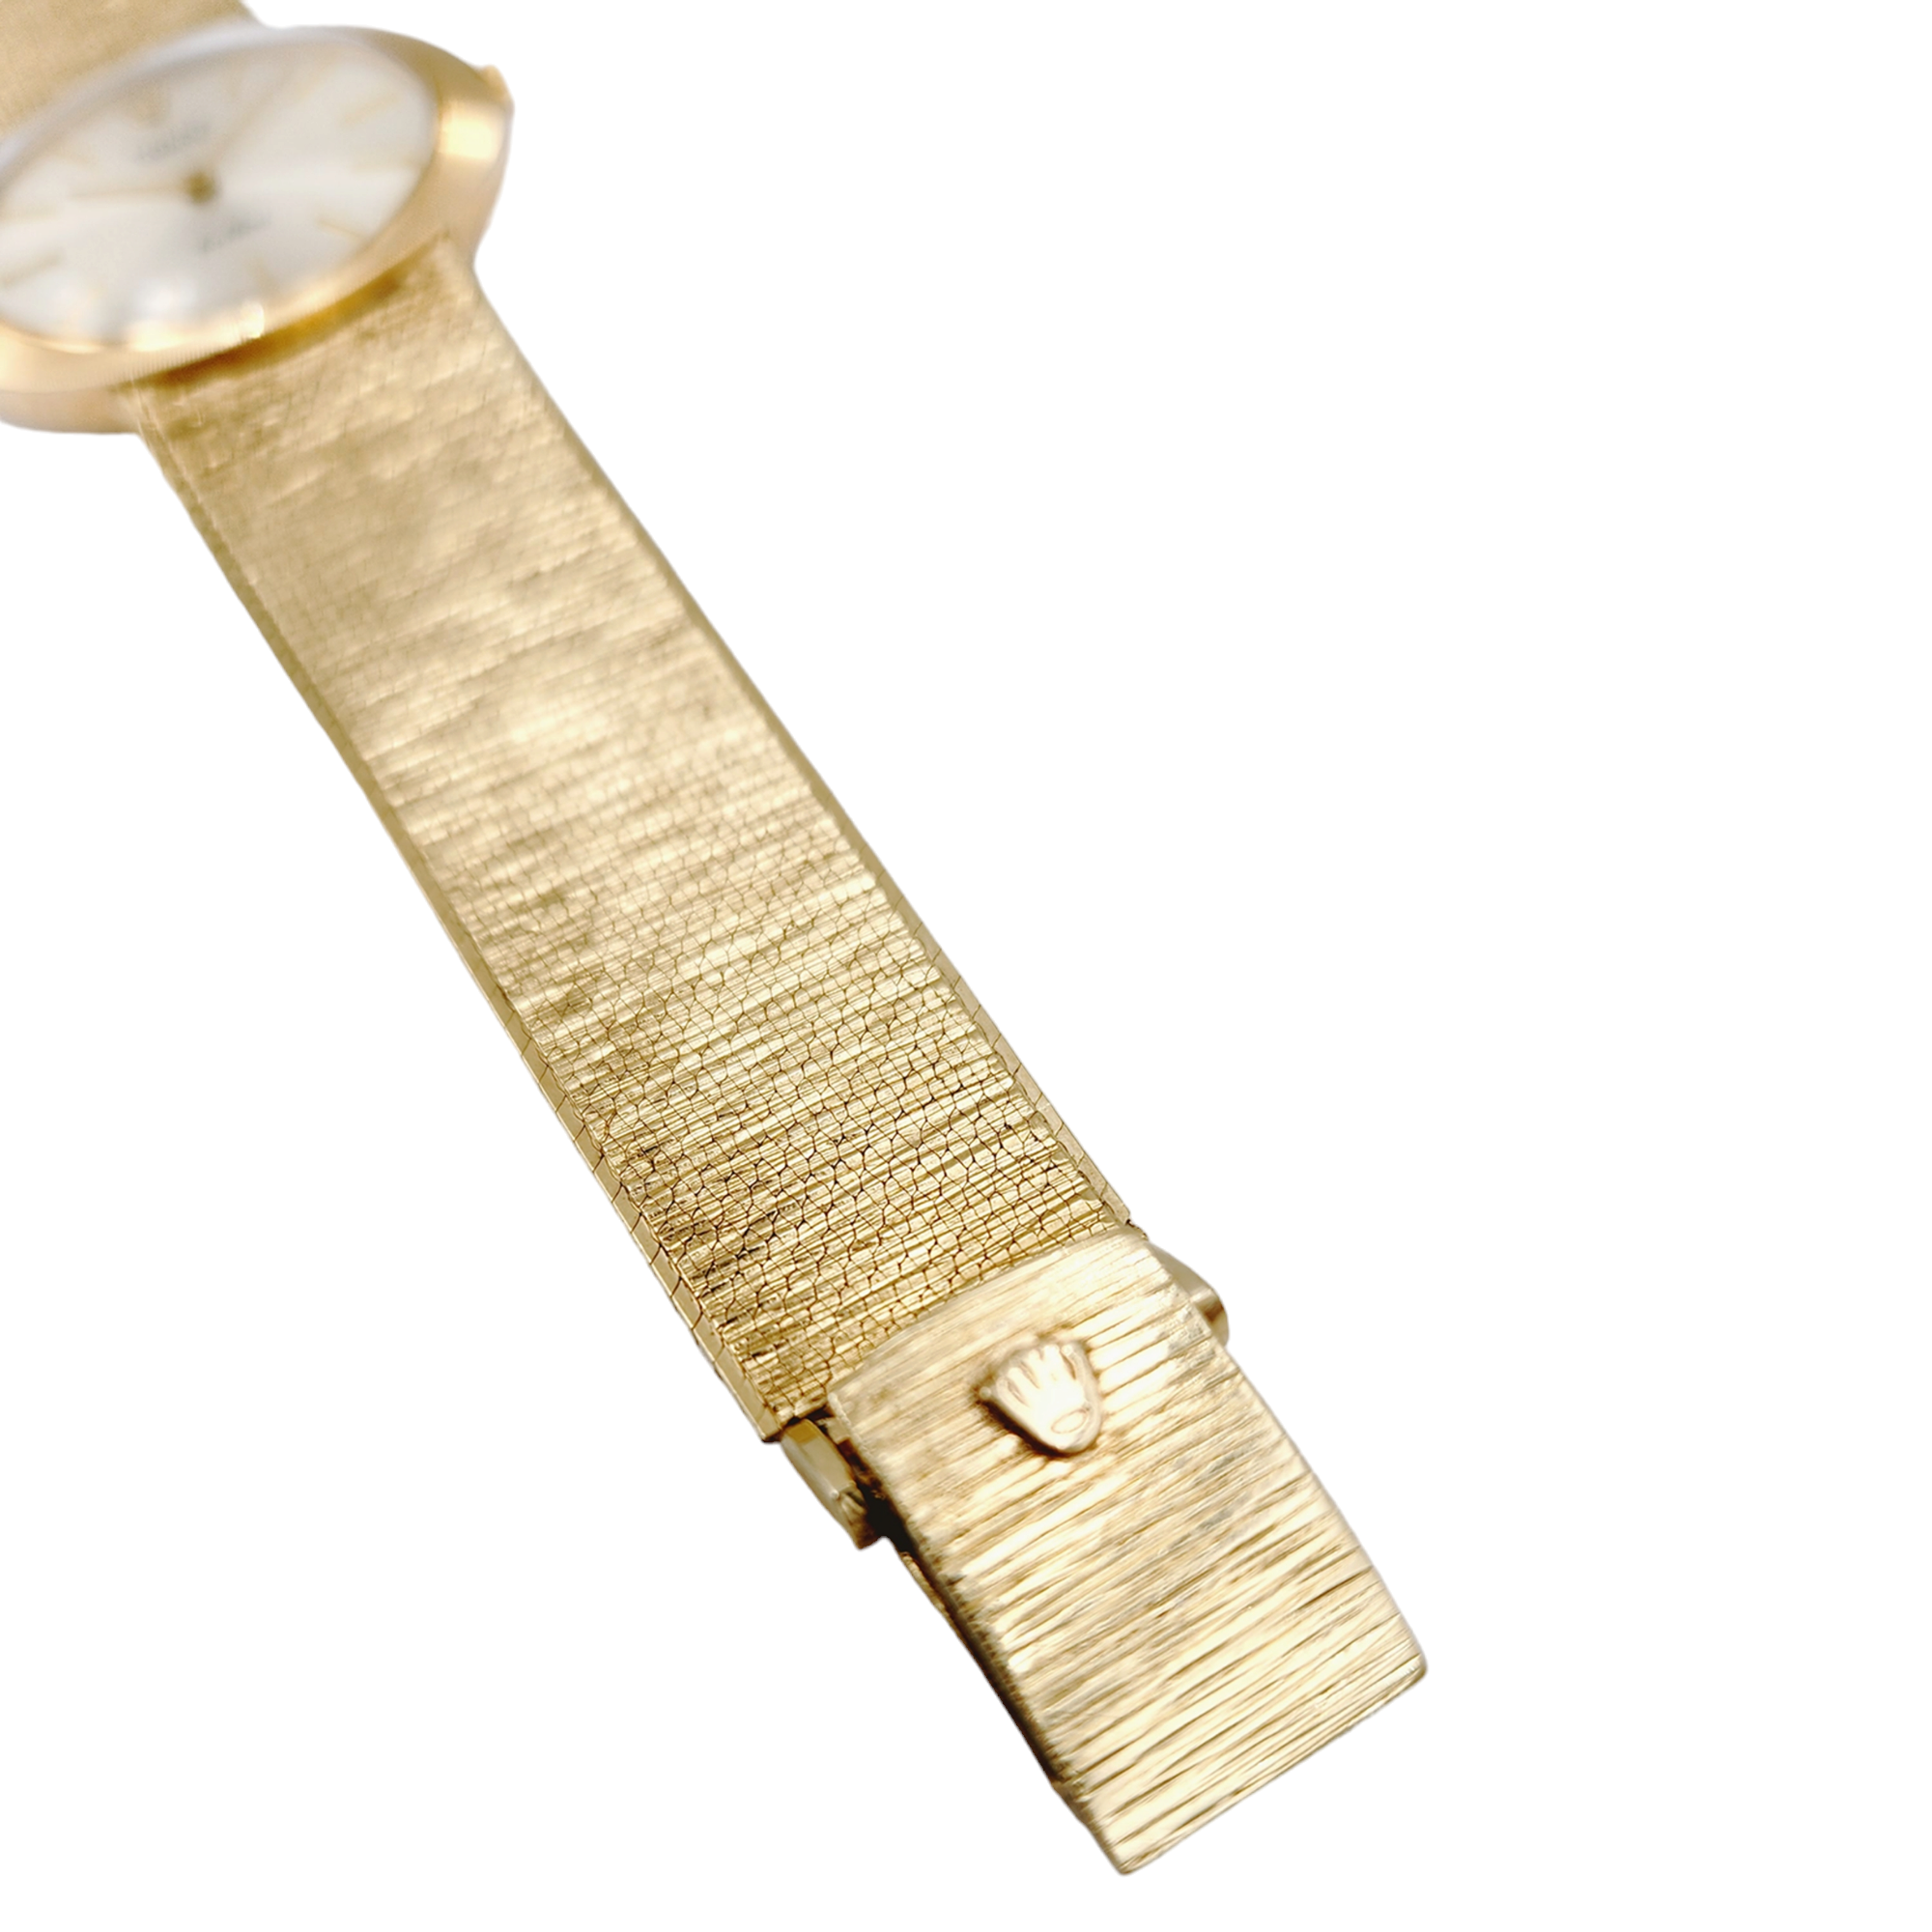 *Rolex Cellini Vintage 14K Yellow Gold Watch with Light Champagne Dial and Smooth Bezel.